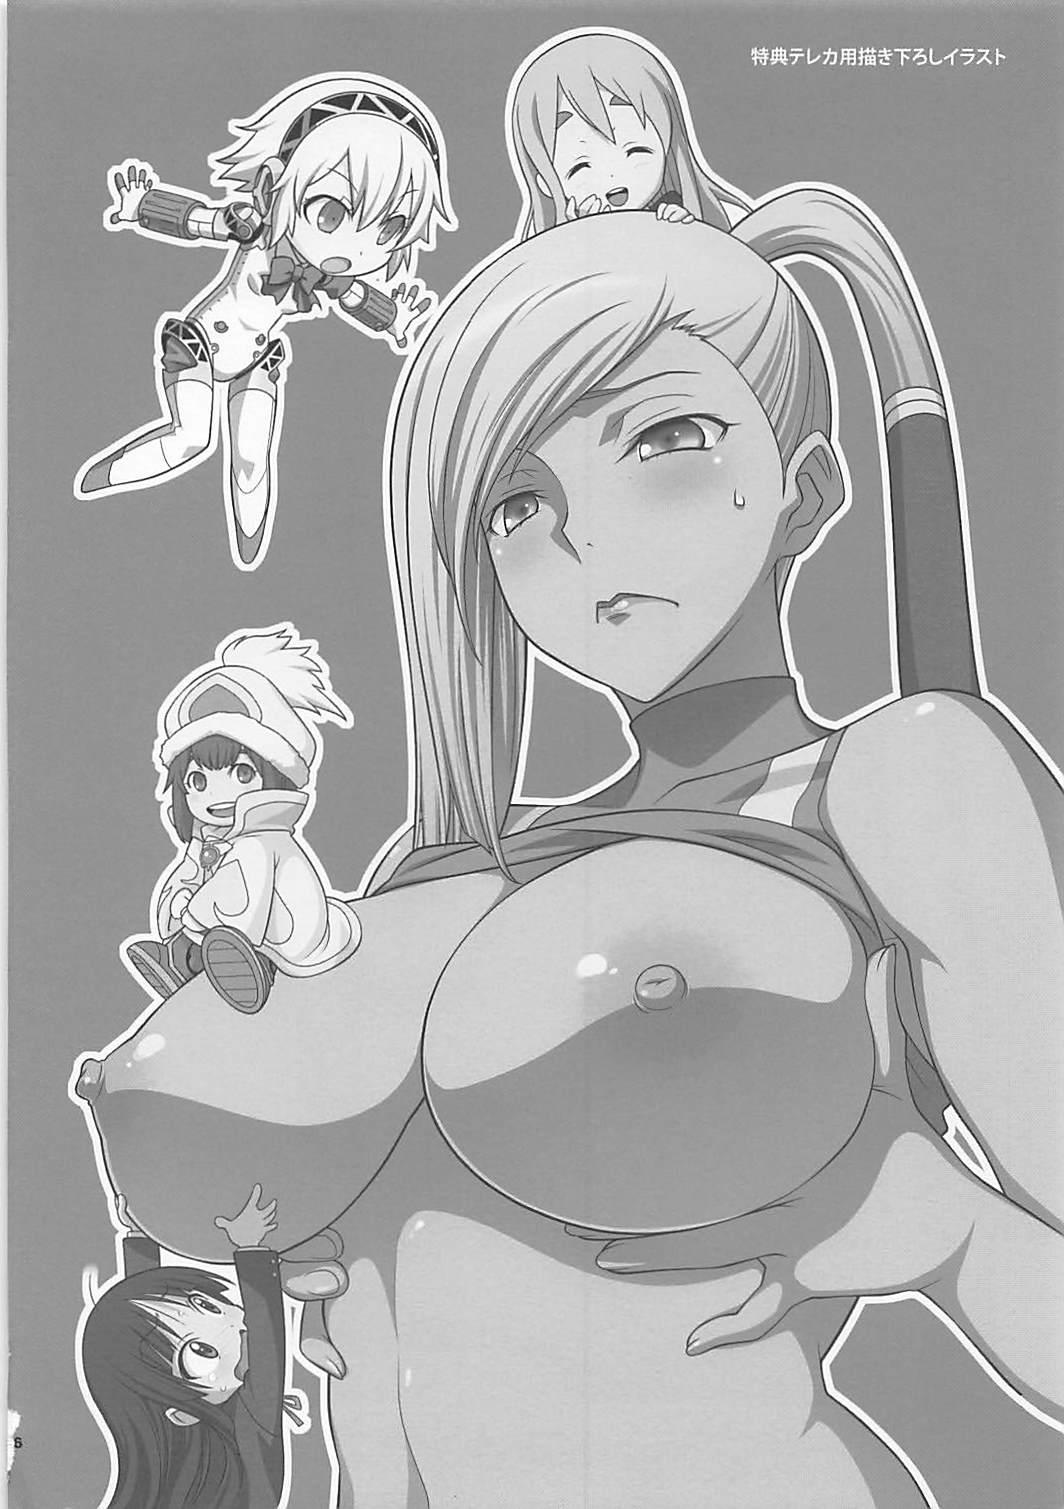 Busty Wagamama Antholo - K-on Code geass Persona 3 Ace attorney Overman king gainer Dick Sucking - Page 115